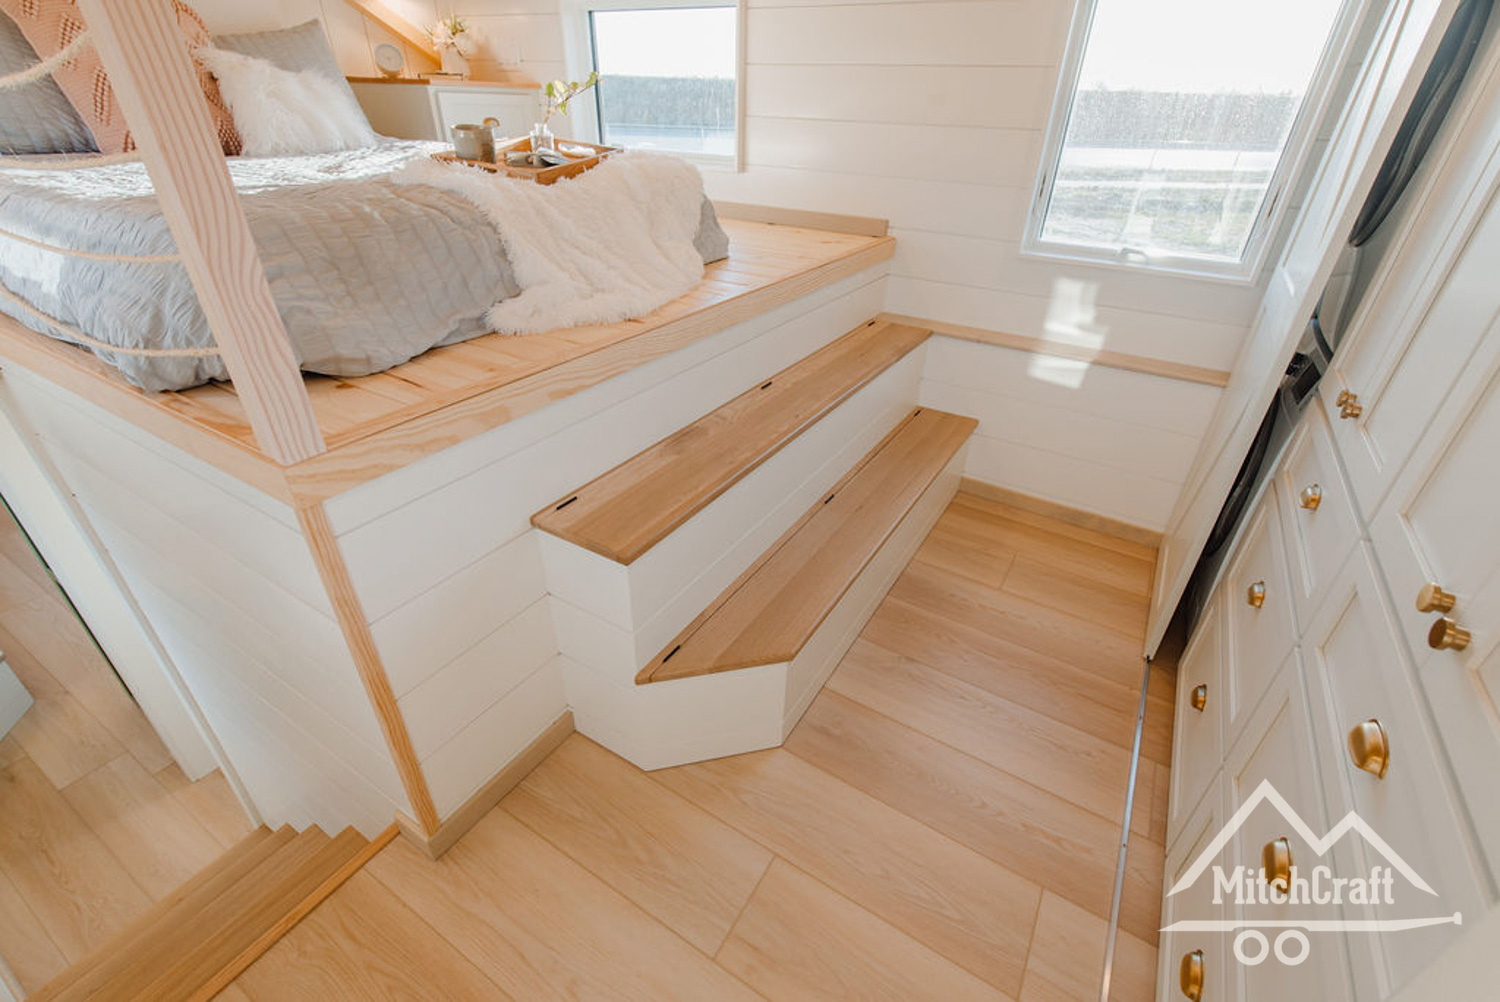 Steps to Master Bed - Kay’s Tiny House by MitchCraft Tiny Homes